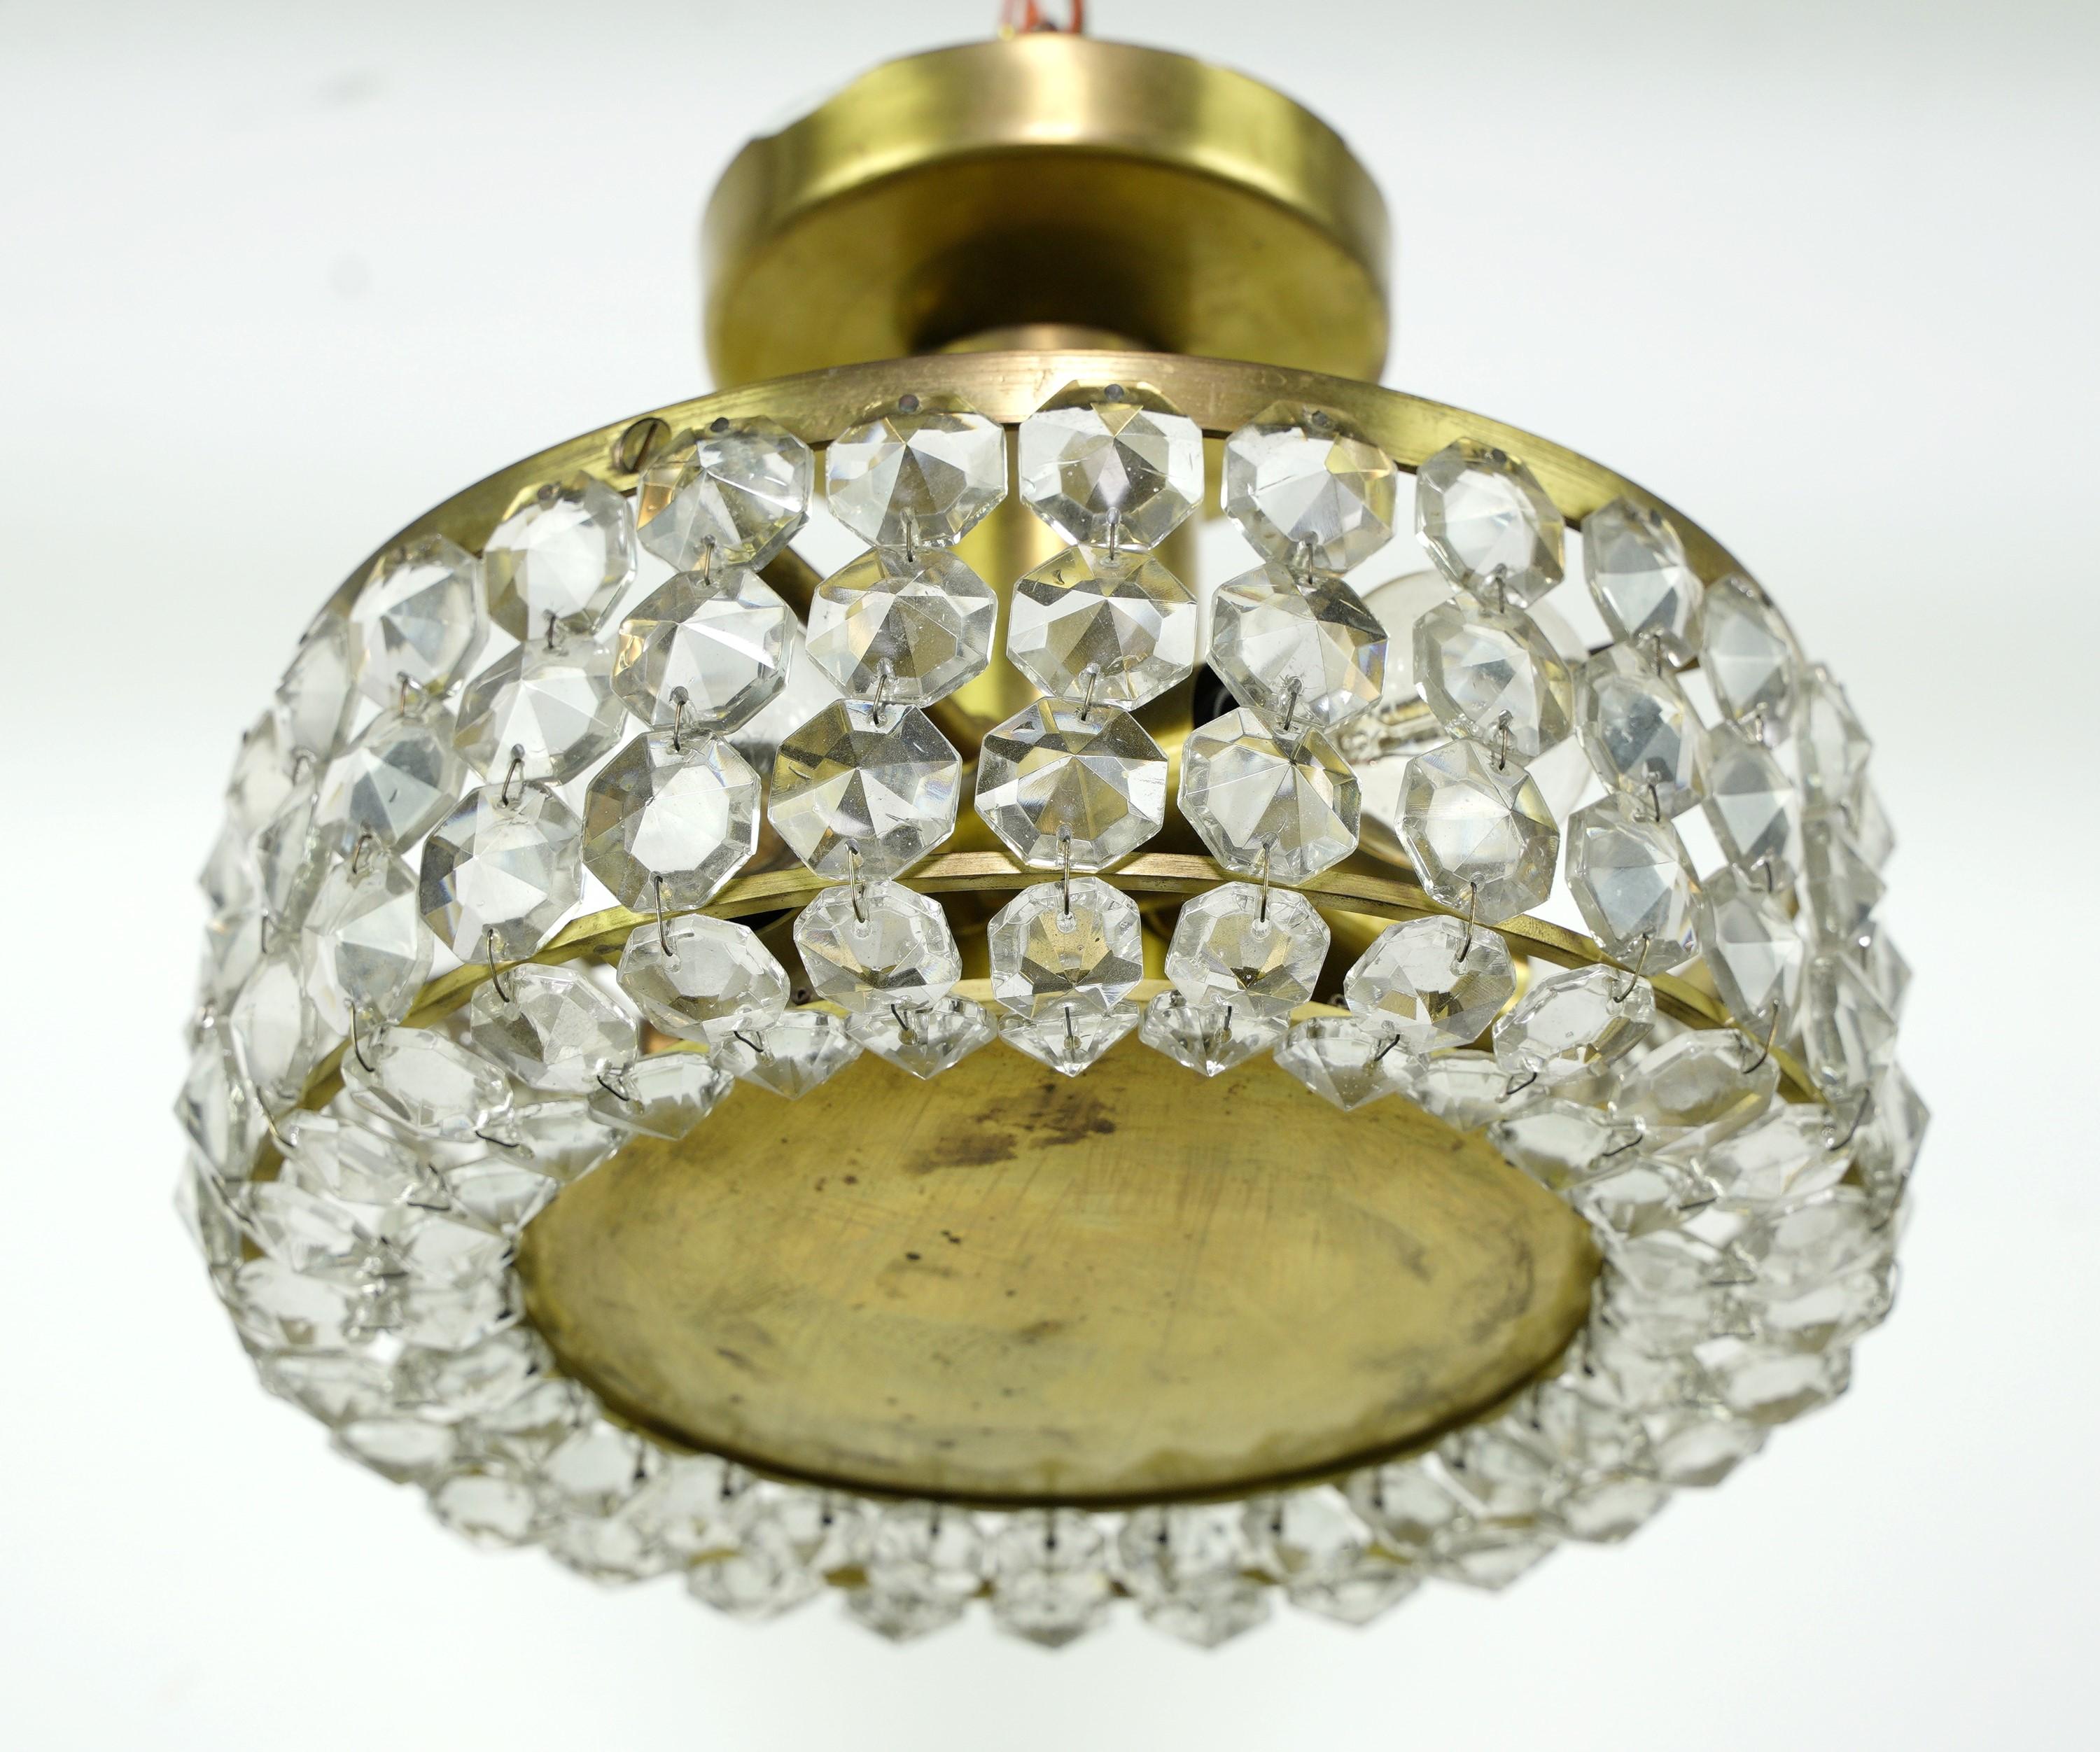 20th century Small brass semi flush mount basket pendant light featuring crystal-like acrylic jewels. Takes five candelabra light bulbs. Cleaned and restored. Please note, this item is located in our Scranton, PA location.